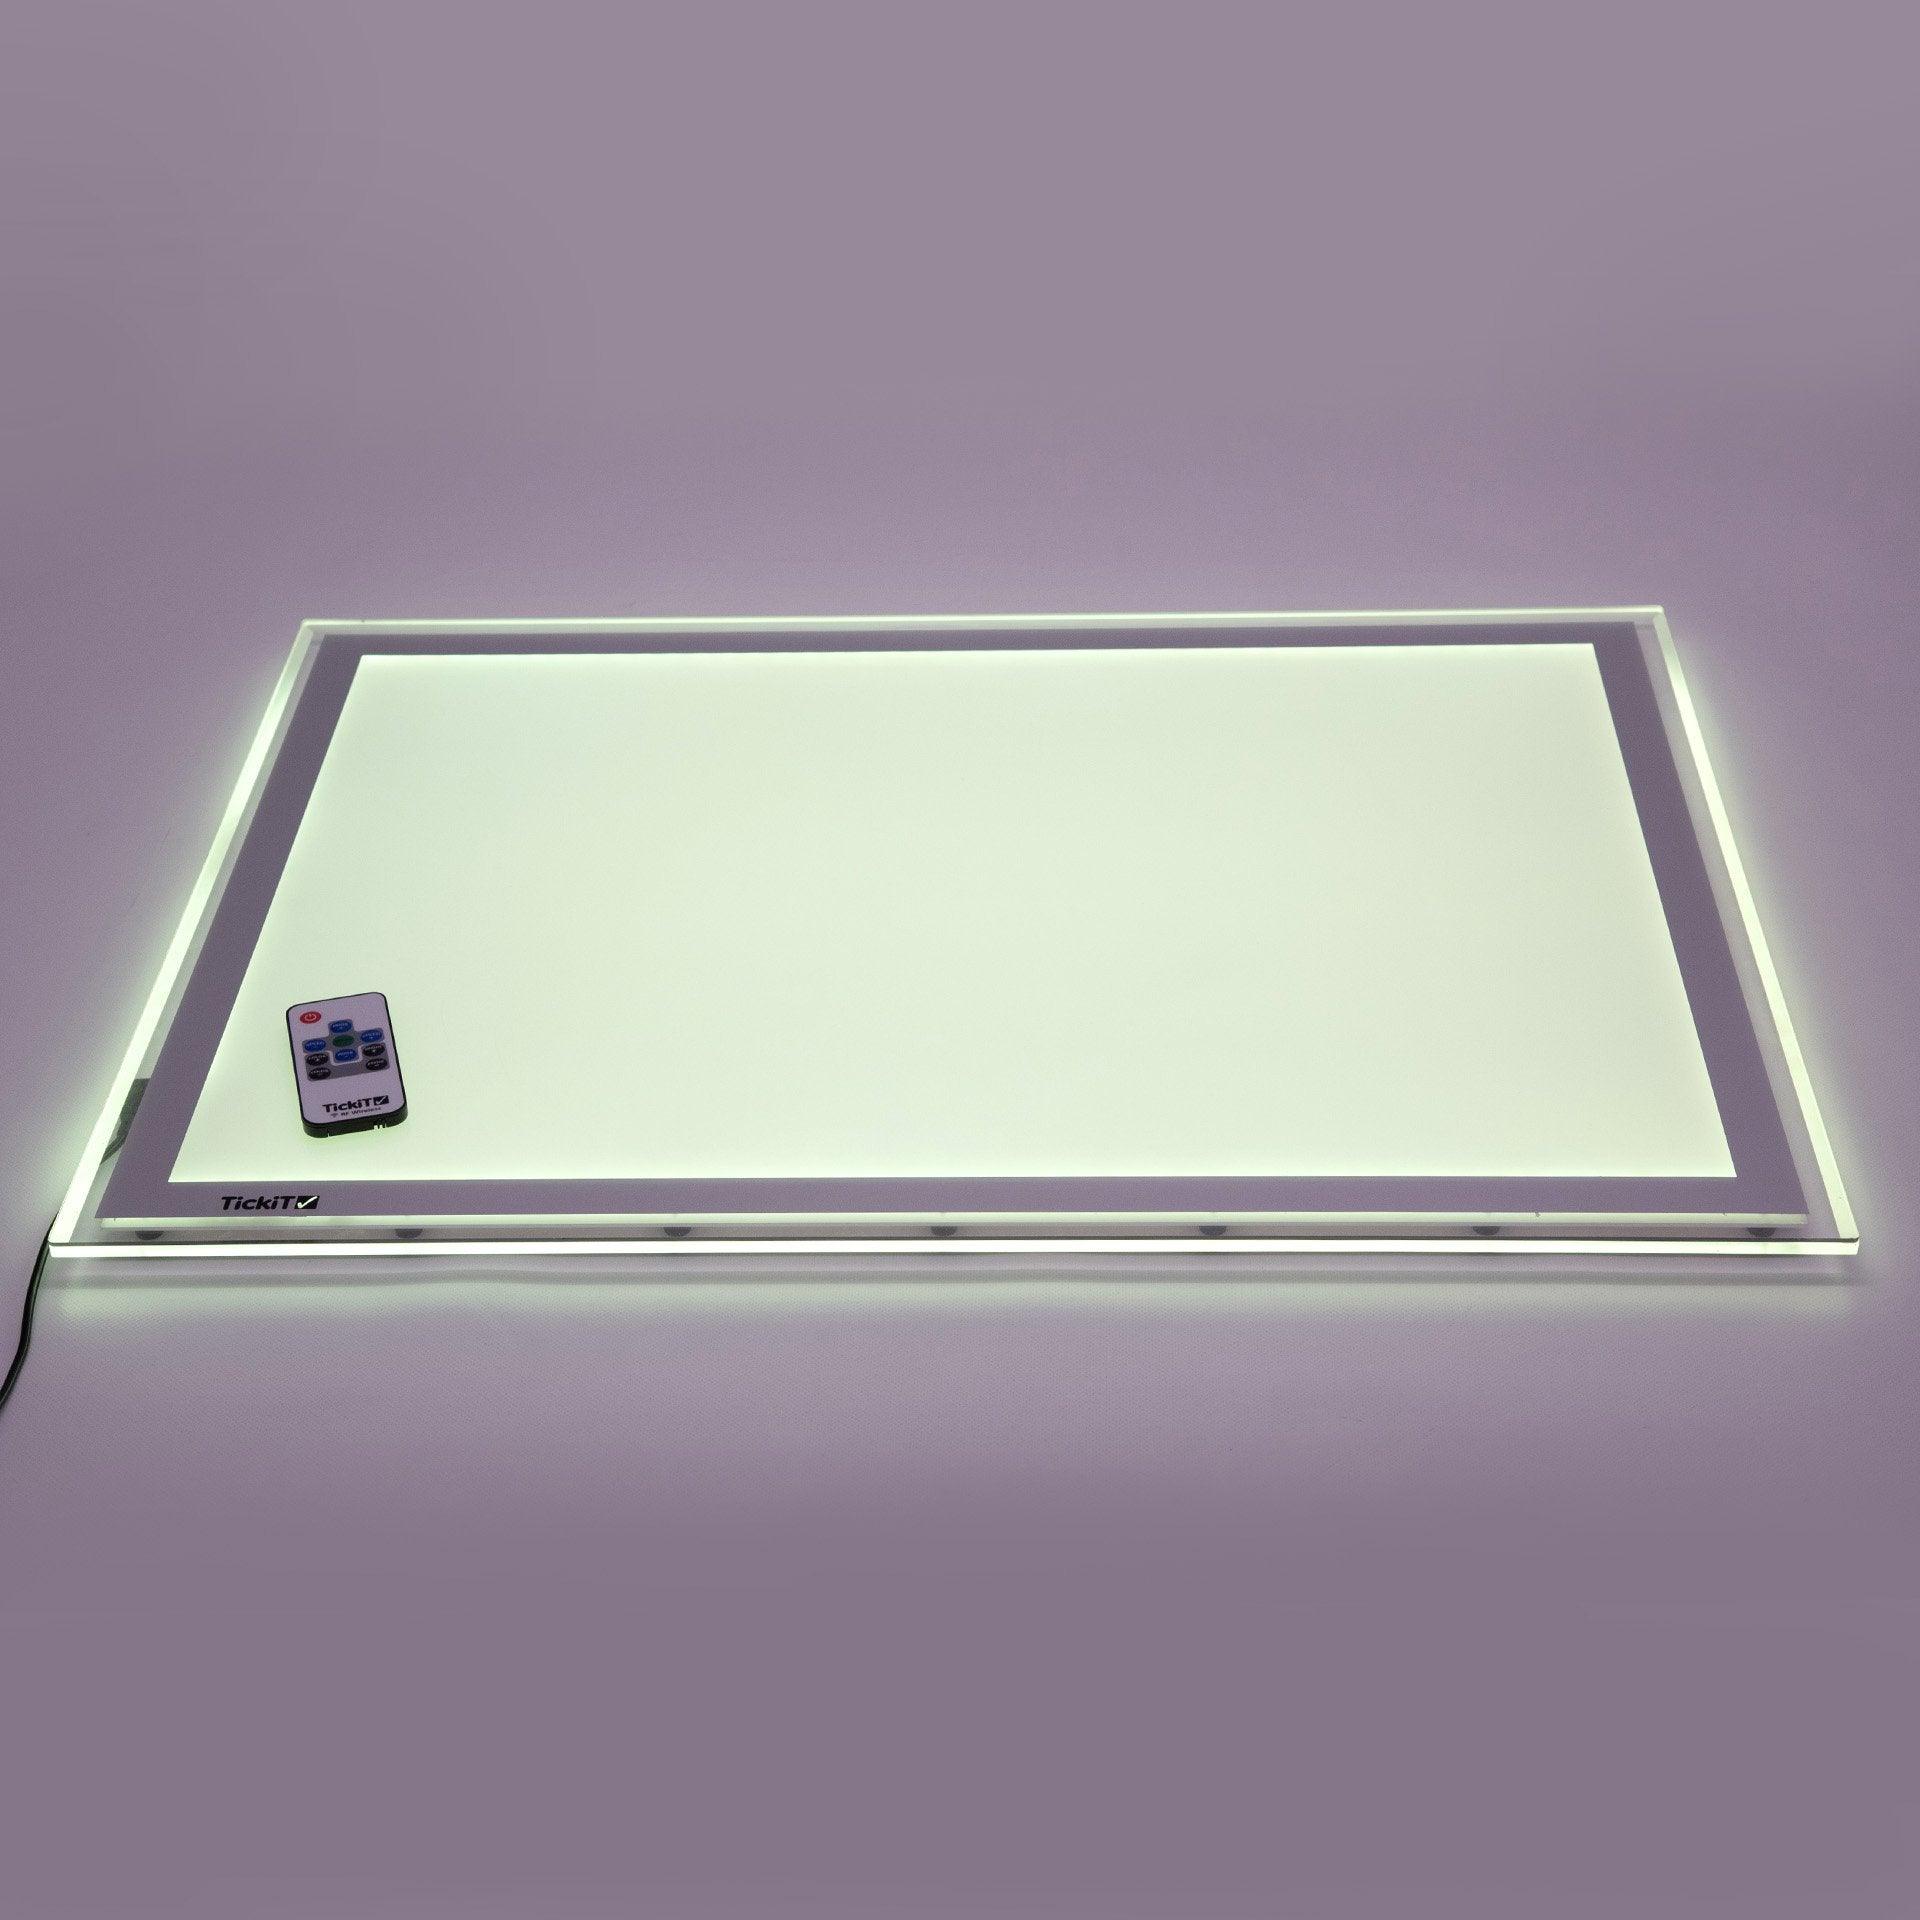 TickiT: podświetlany panel A2 Colour Changing Light Panel